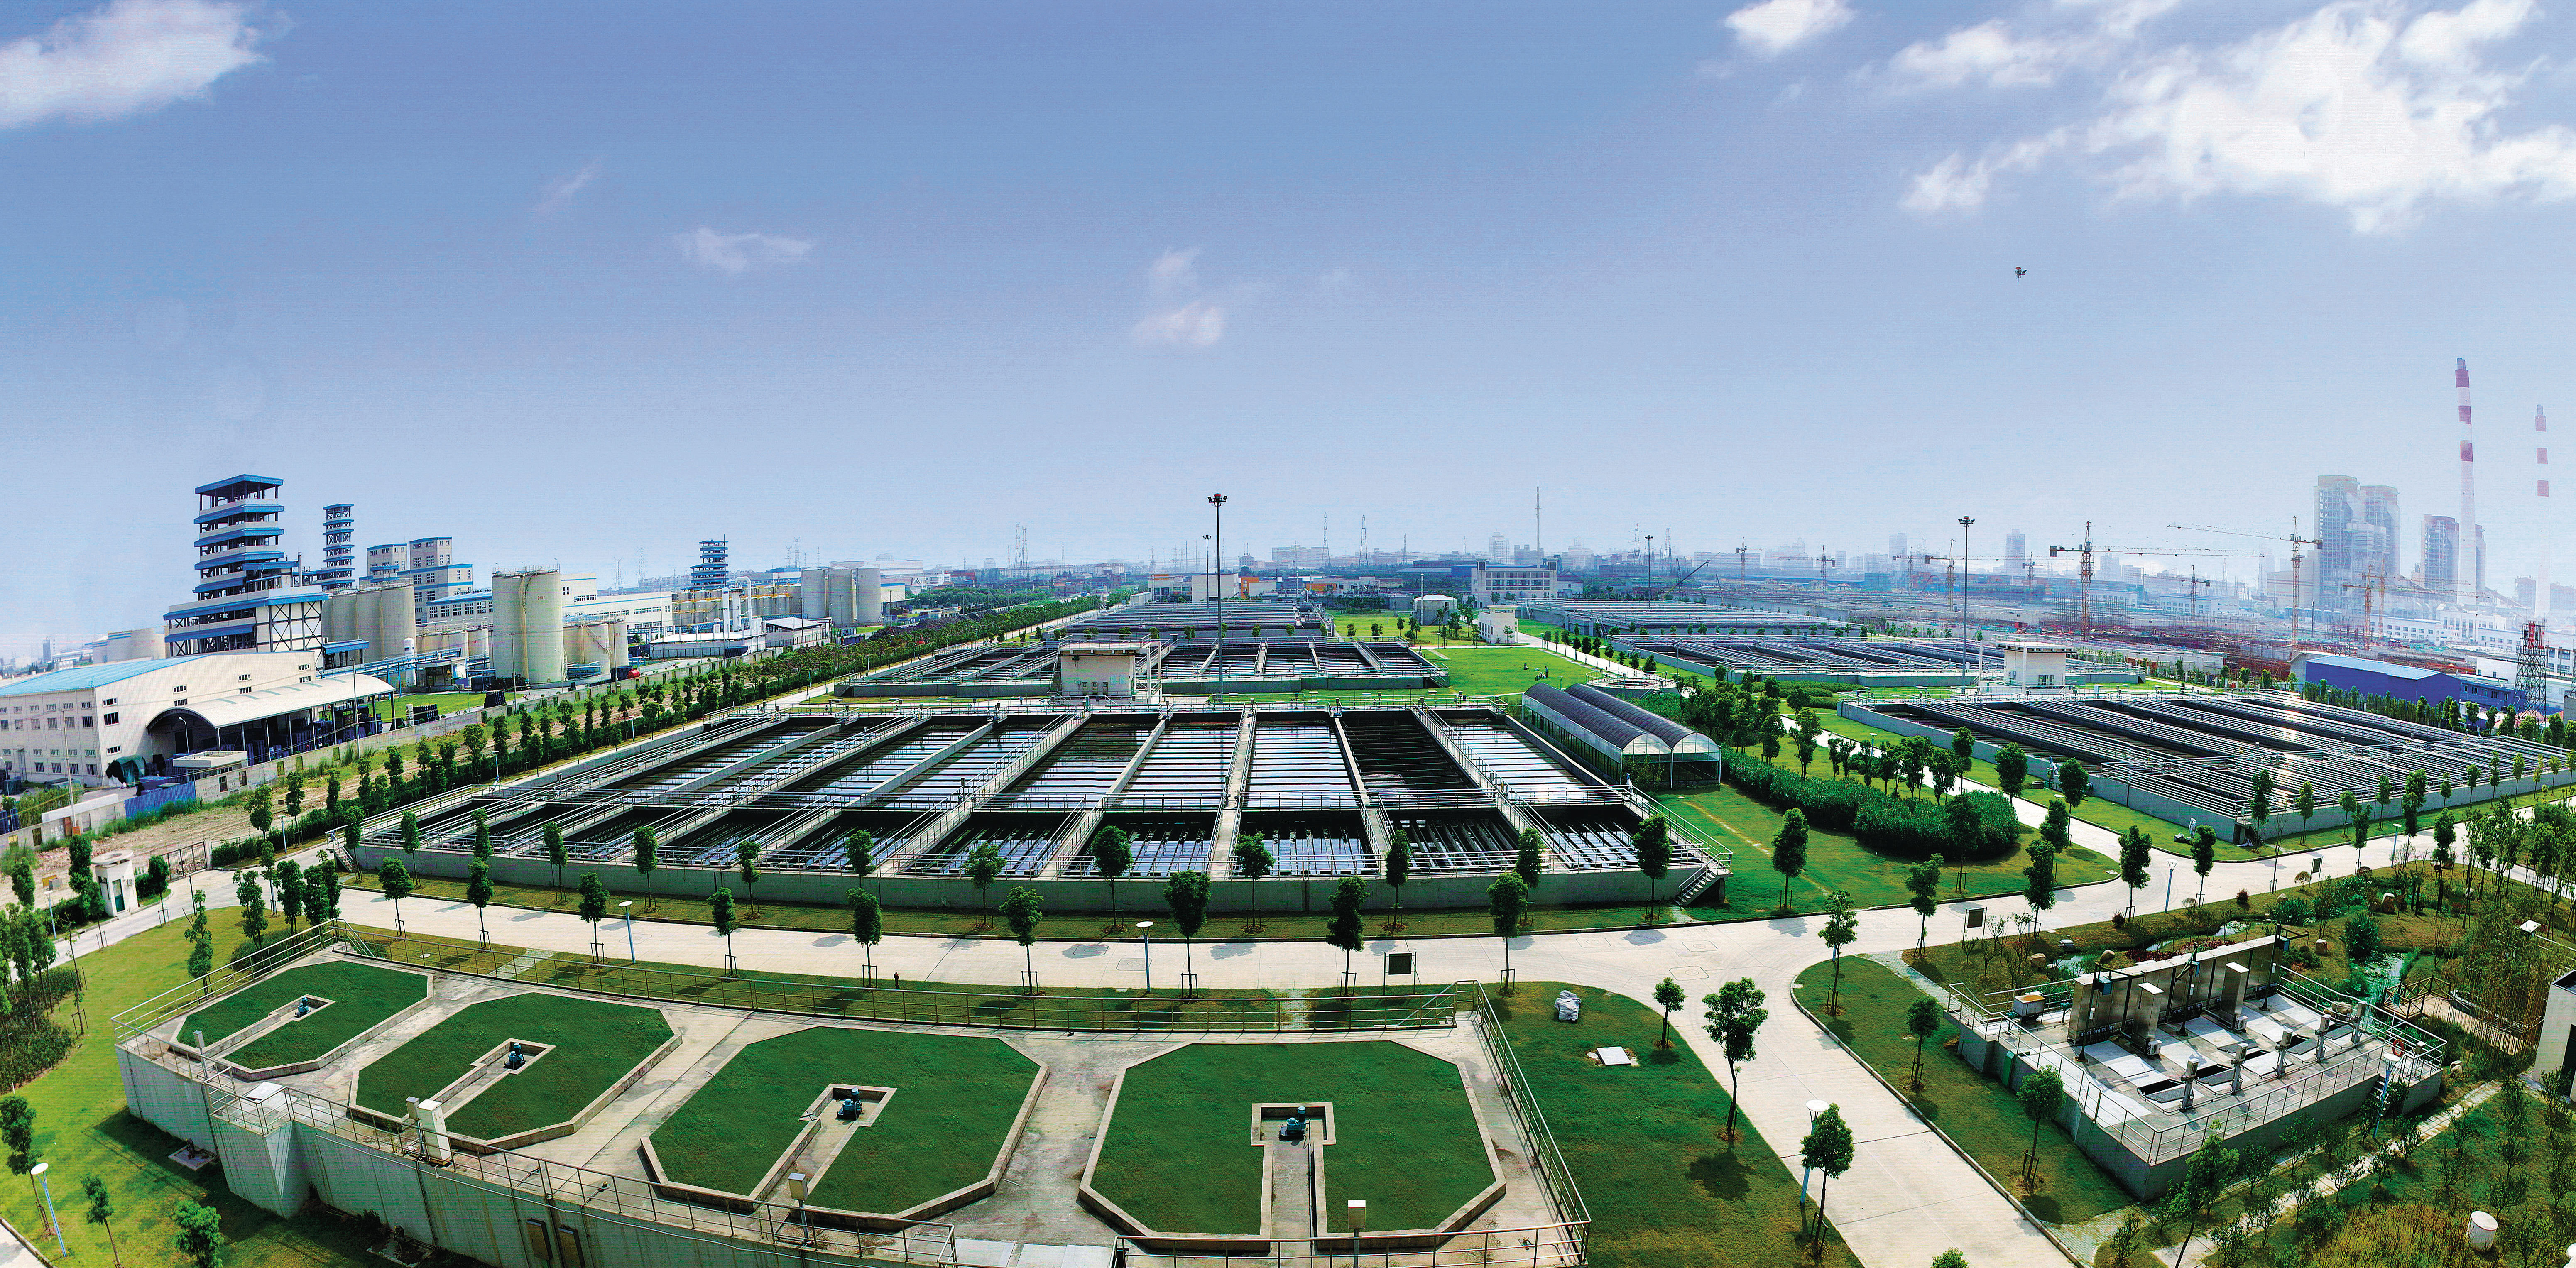 The largest wastewater treatment plant in Asia: Shanghai Bailonggang Wastewater Treatment Plant